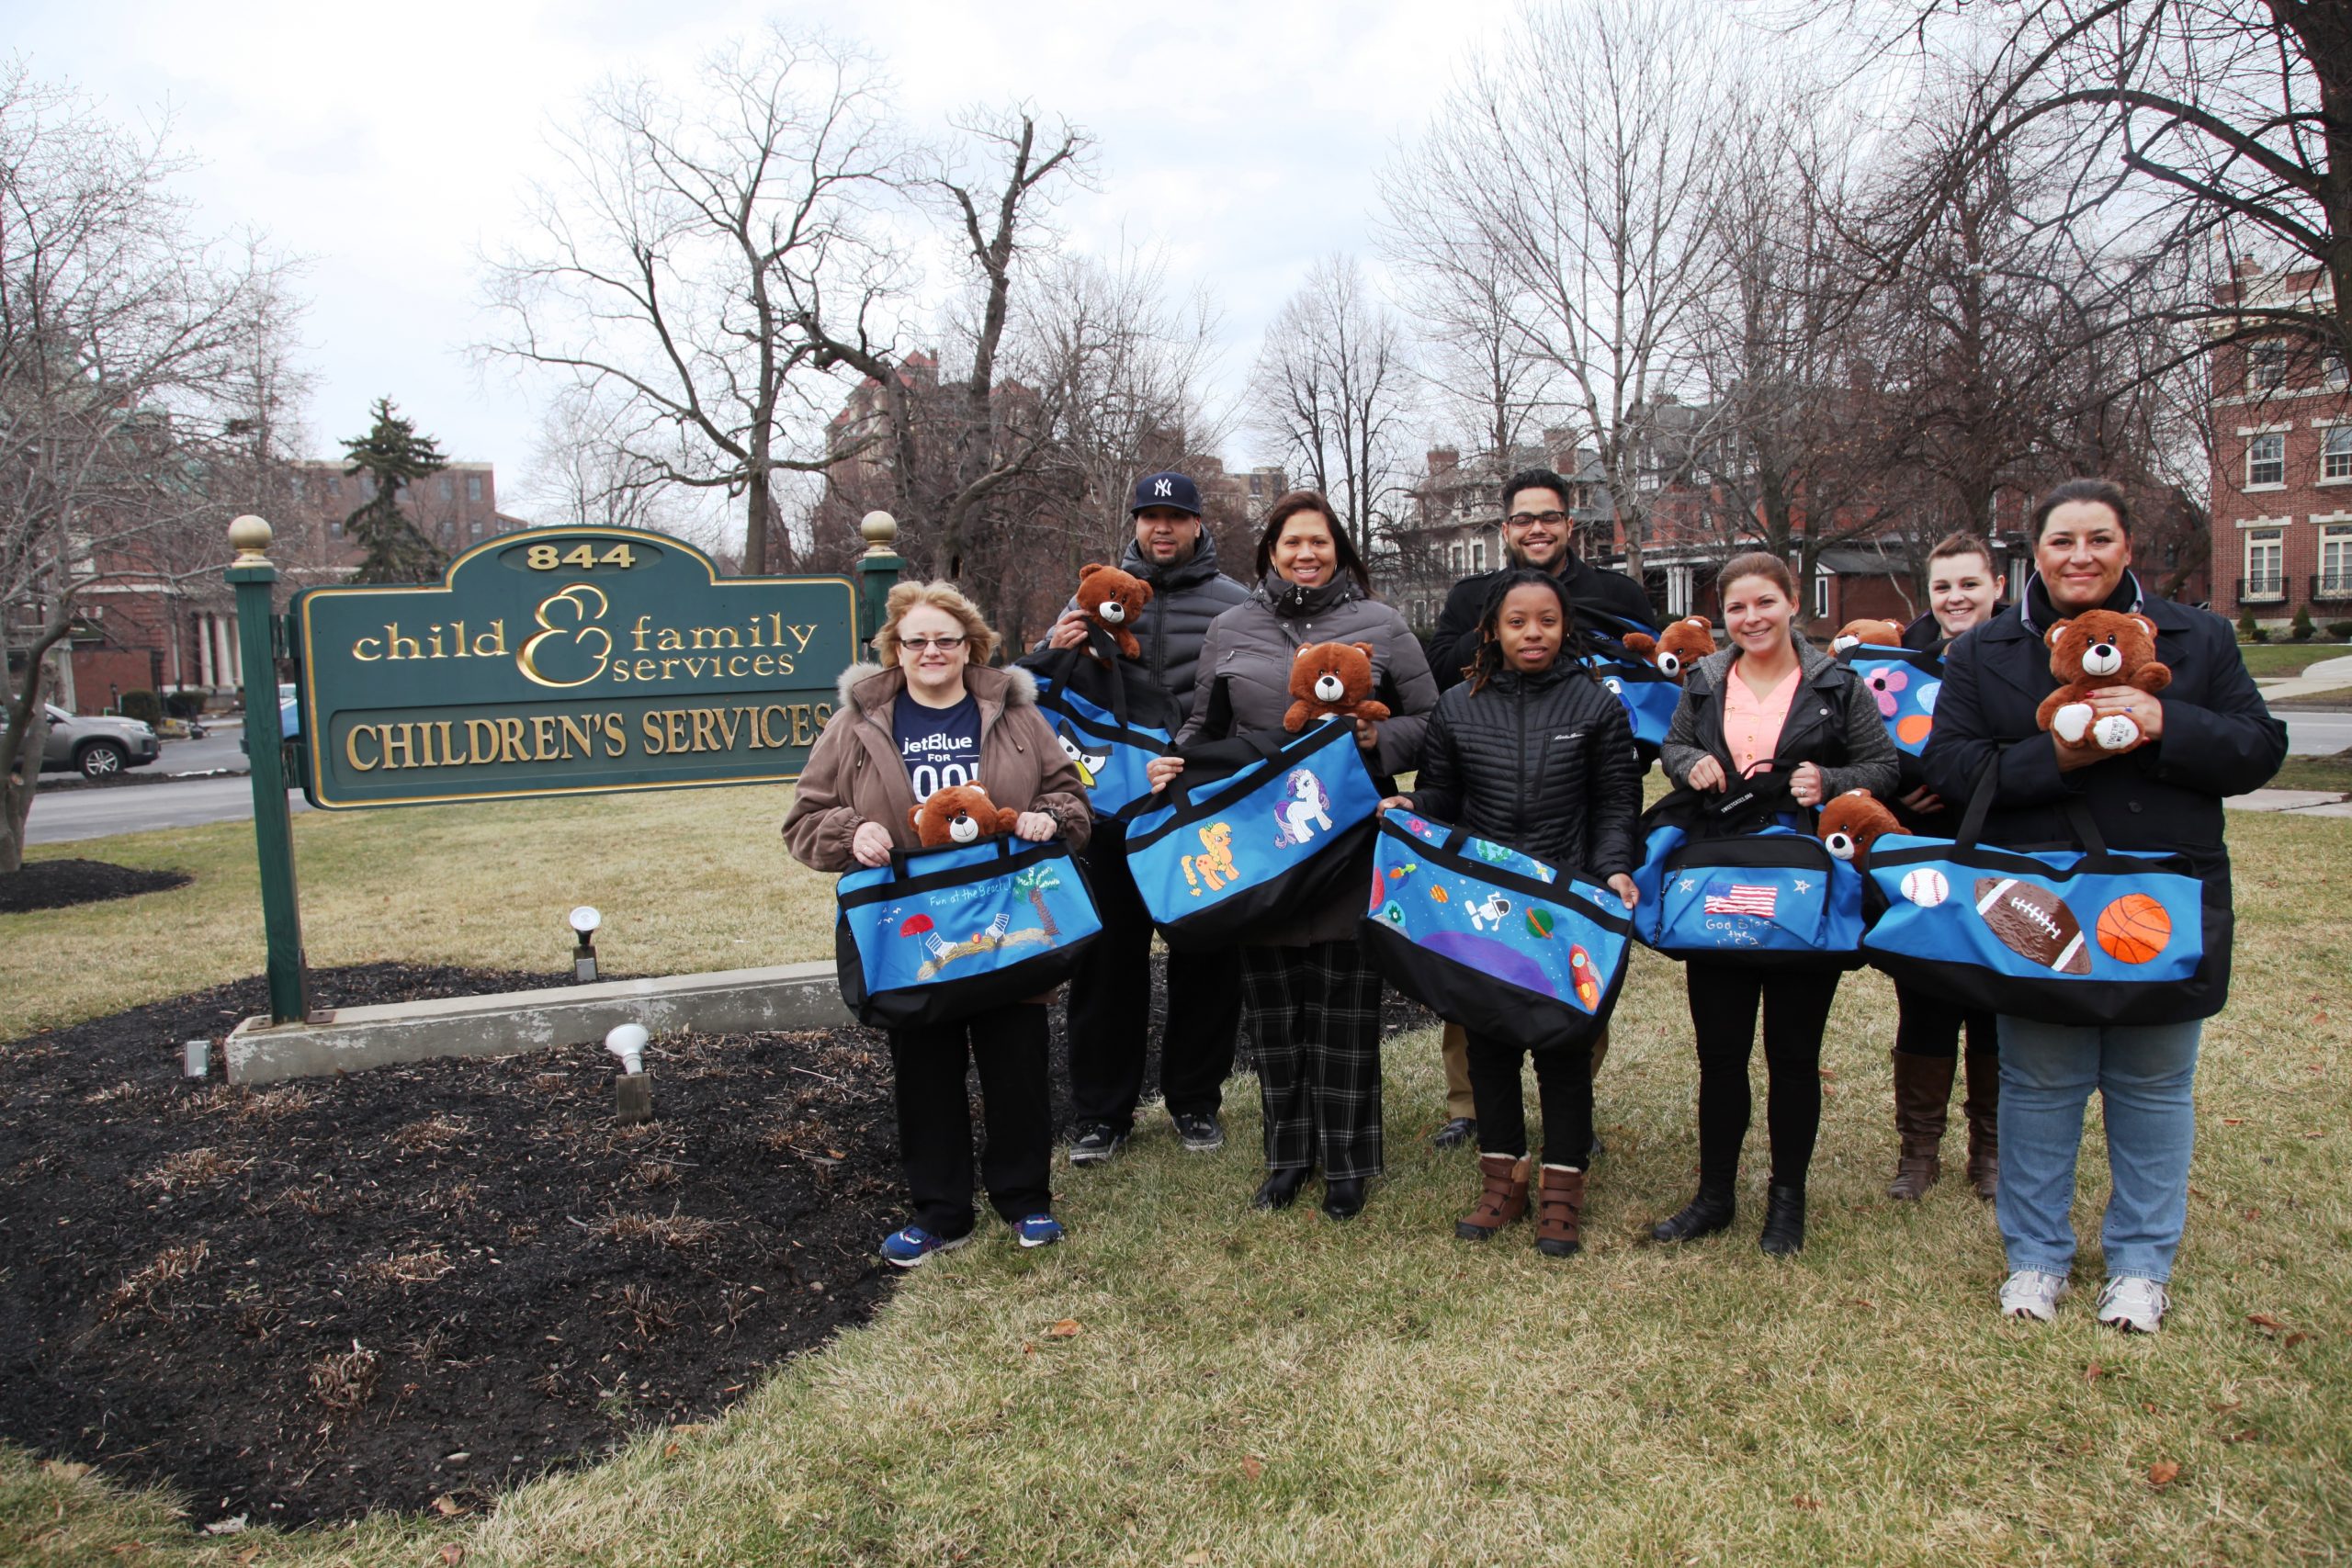 A group of eight hold blue duffel bags in front of the Child & Family Services lawn sign